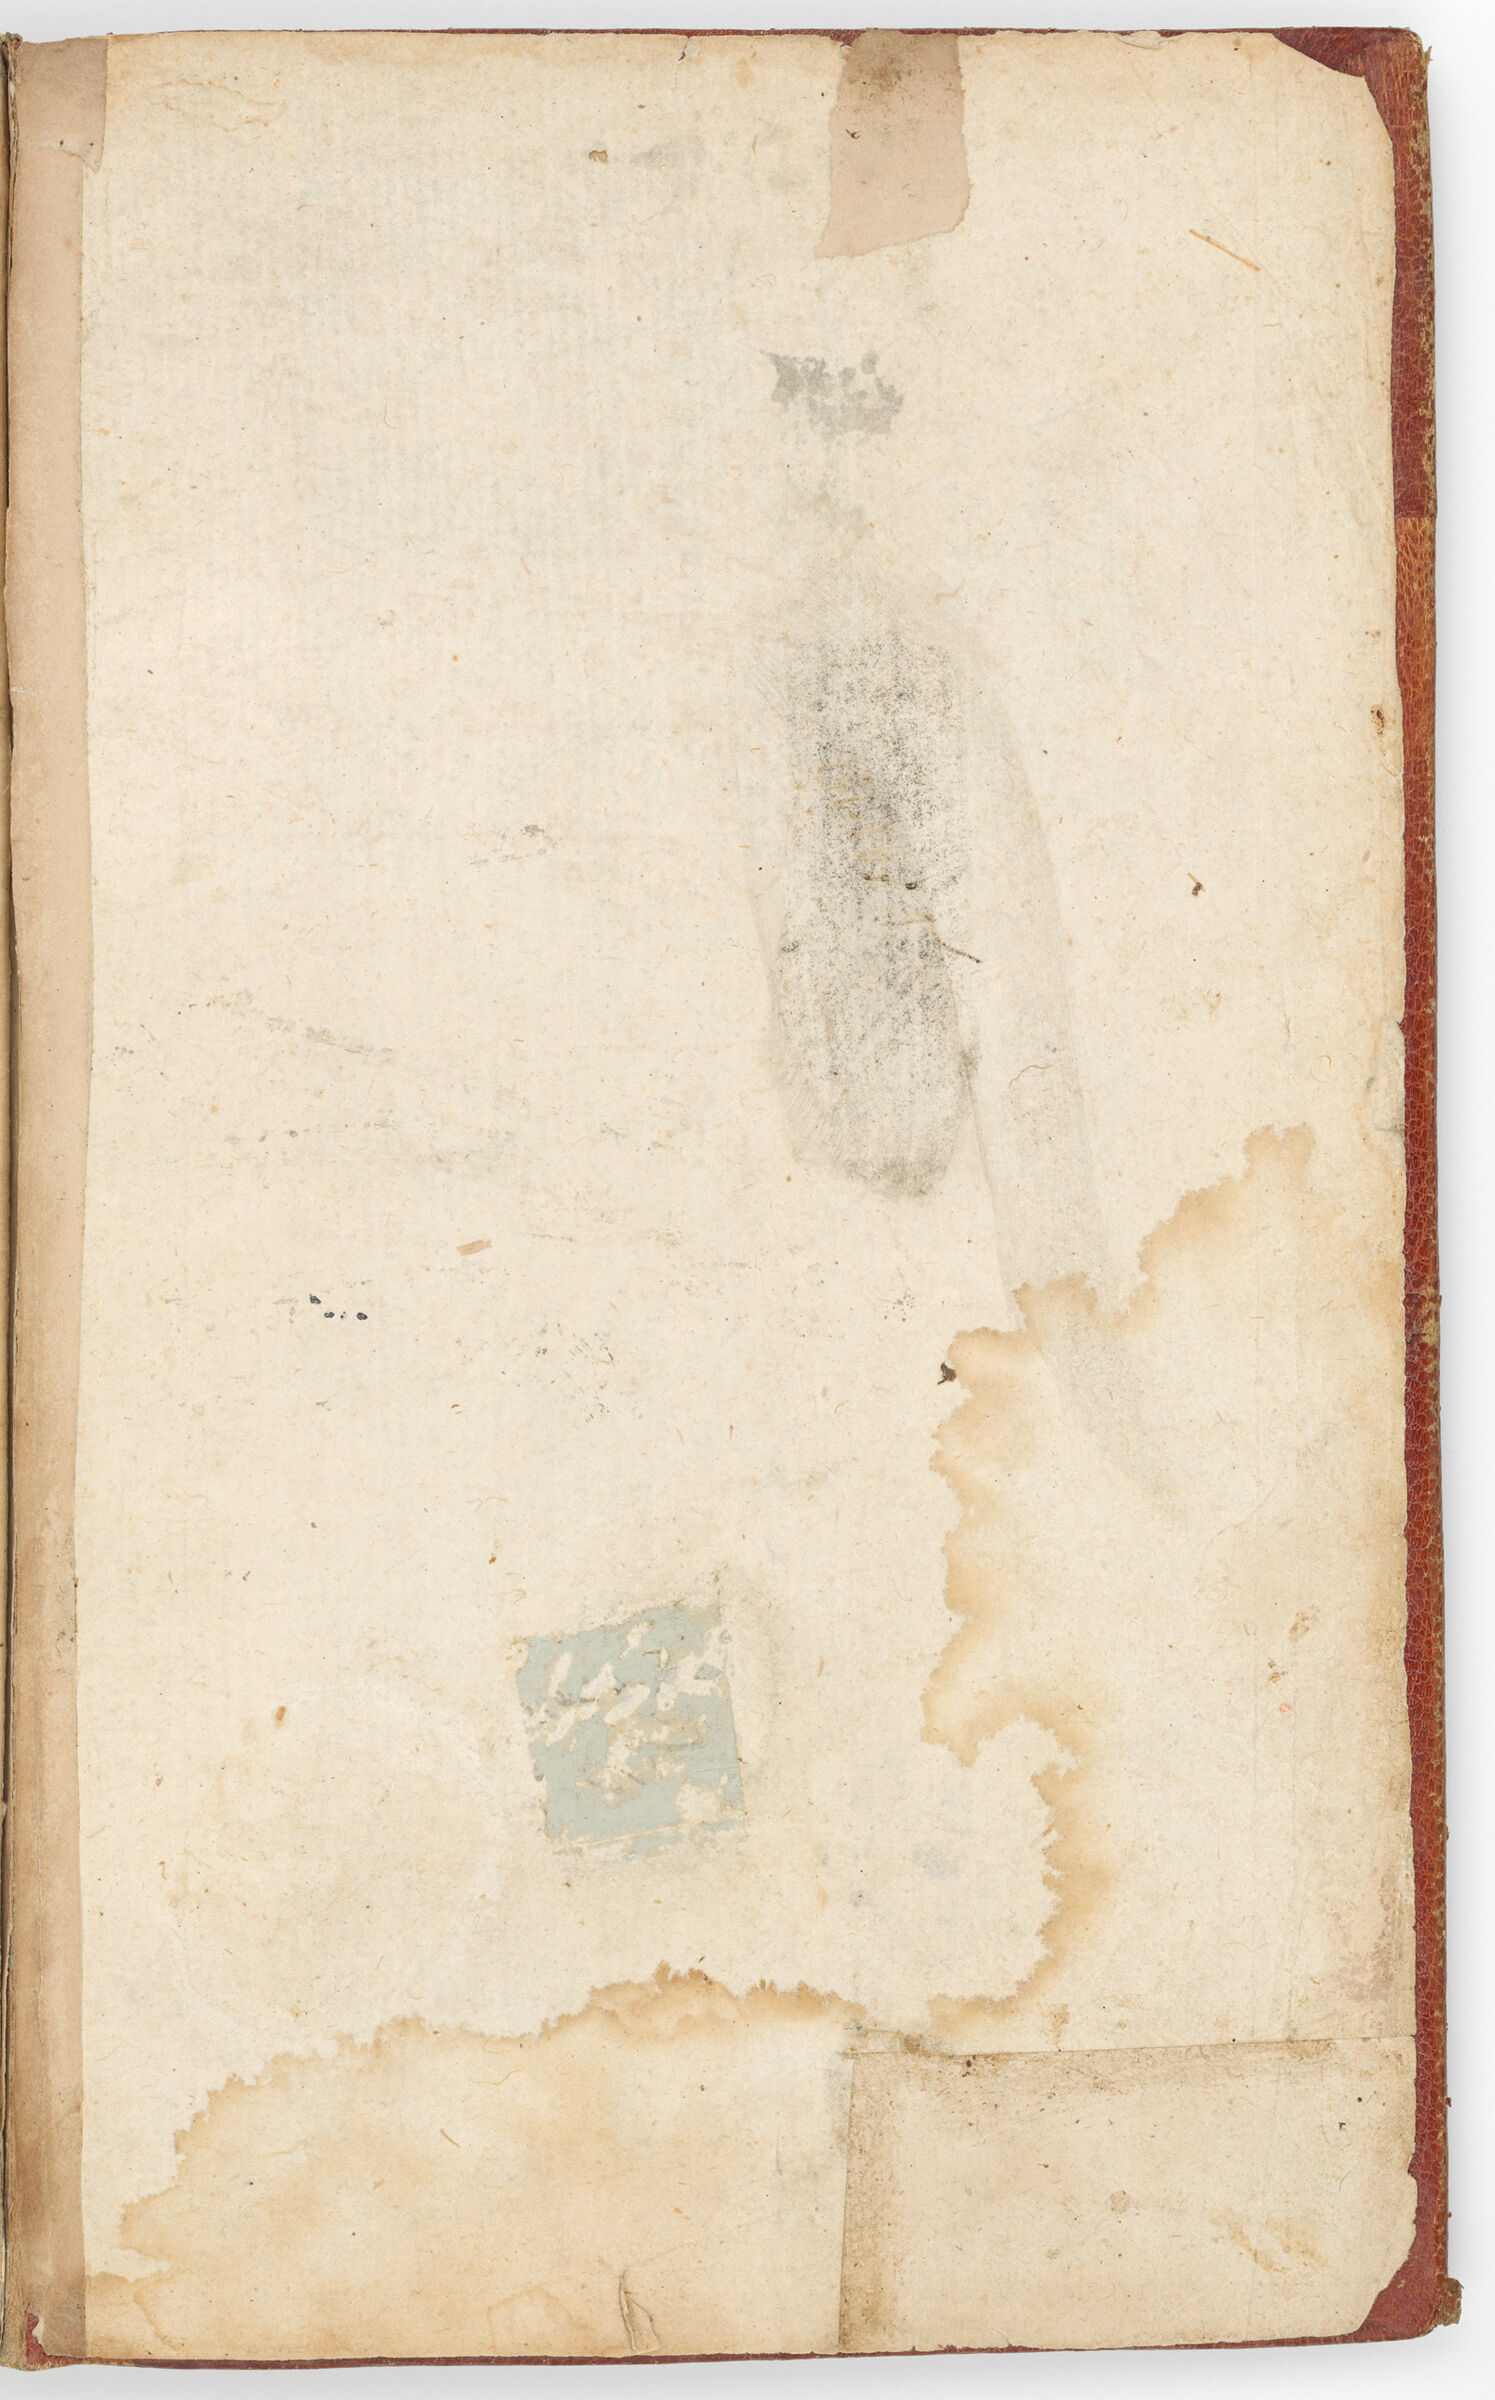 Flyleaf (Blank Recto, Blank Verso Of Folio 1) From A Manuscript Of Subhat Al-Abrar By Jami